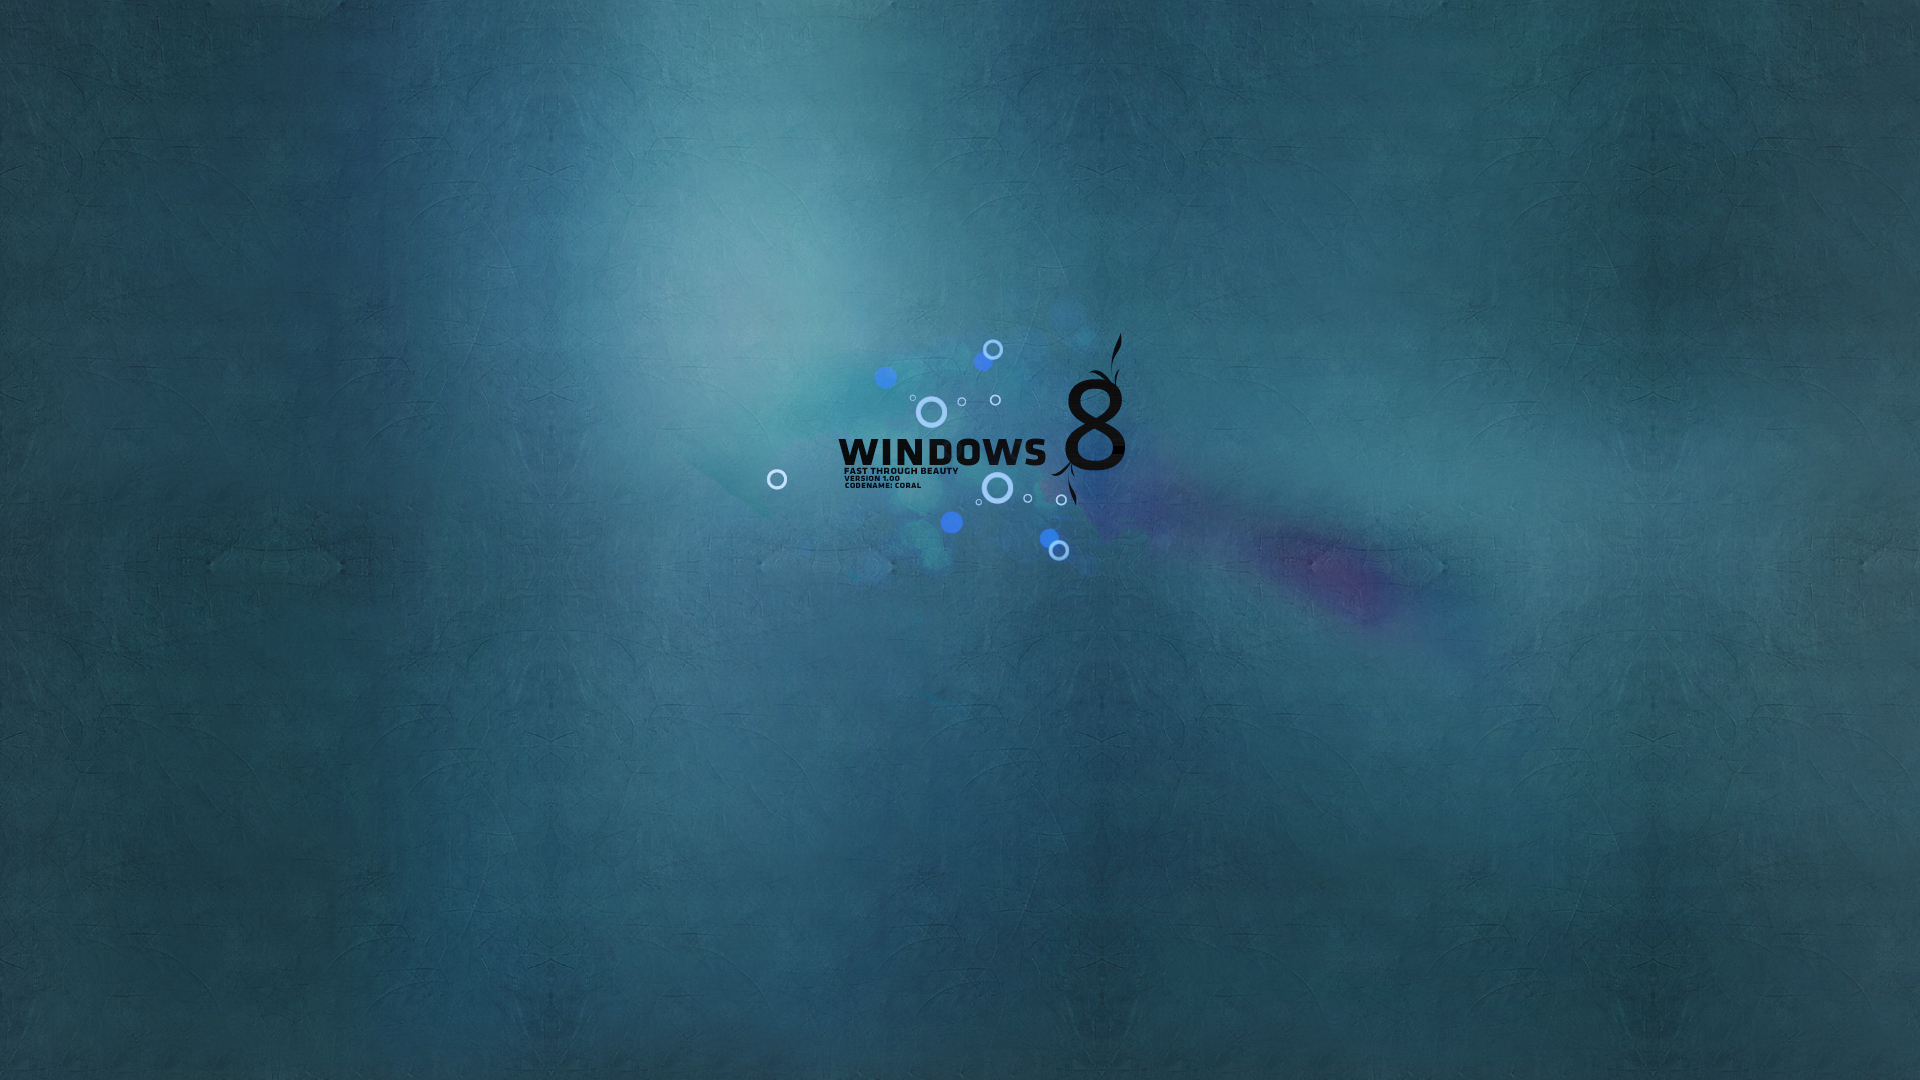 Download Microsoft Windows 8 Wallpapers Pack 3